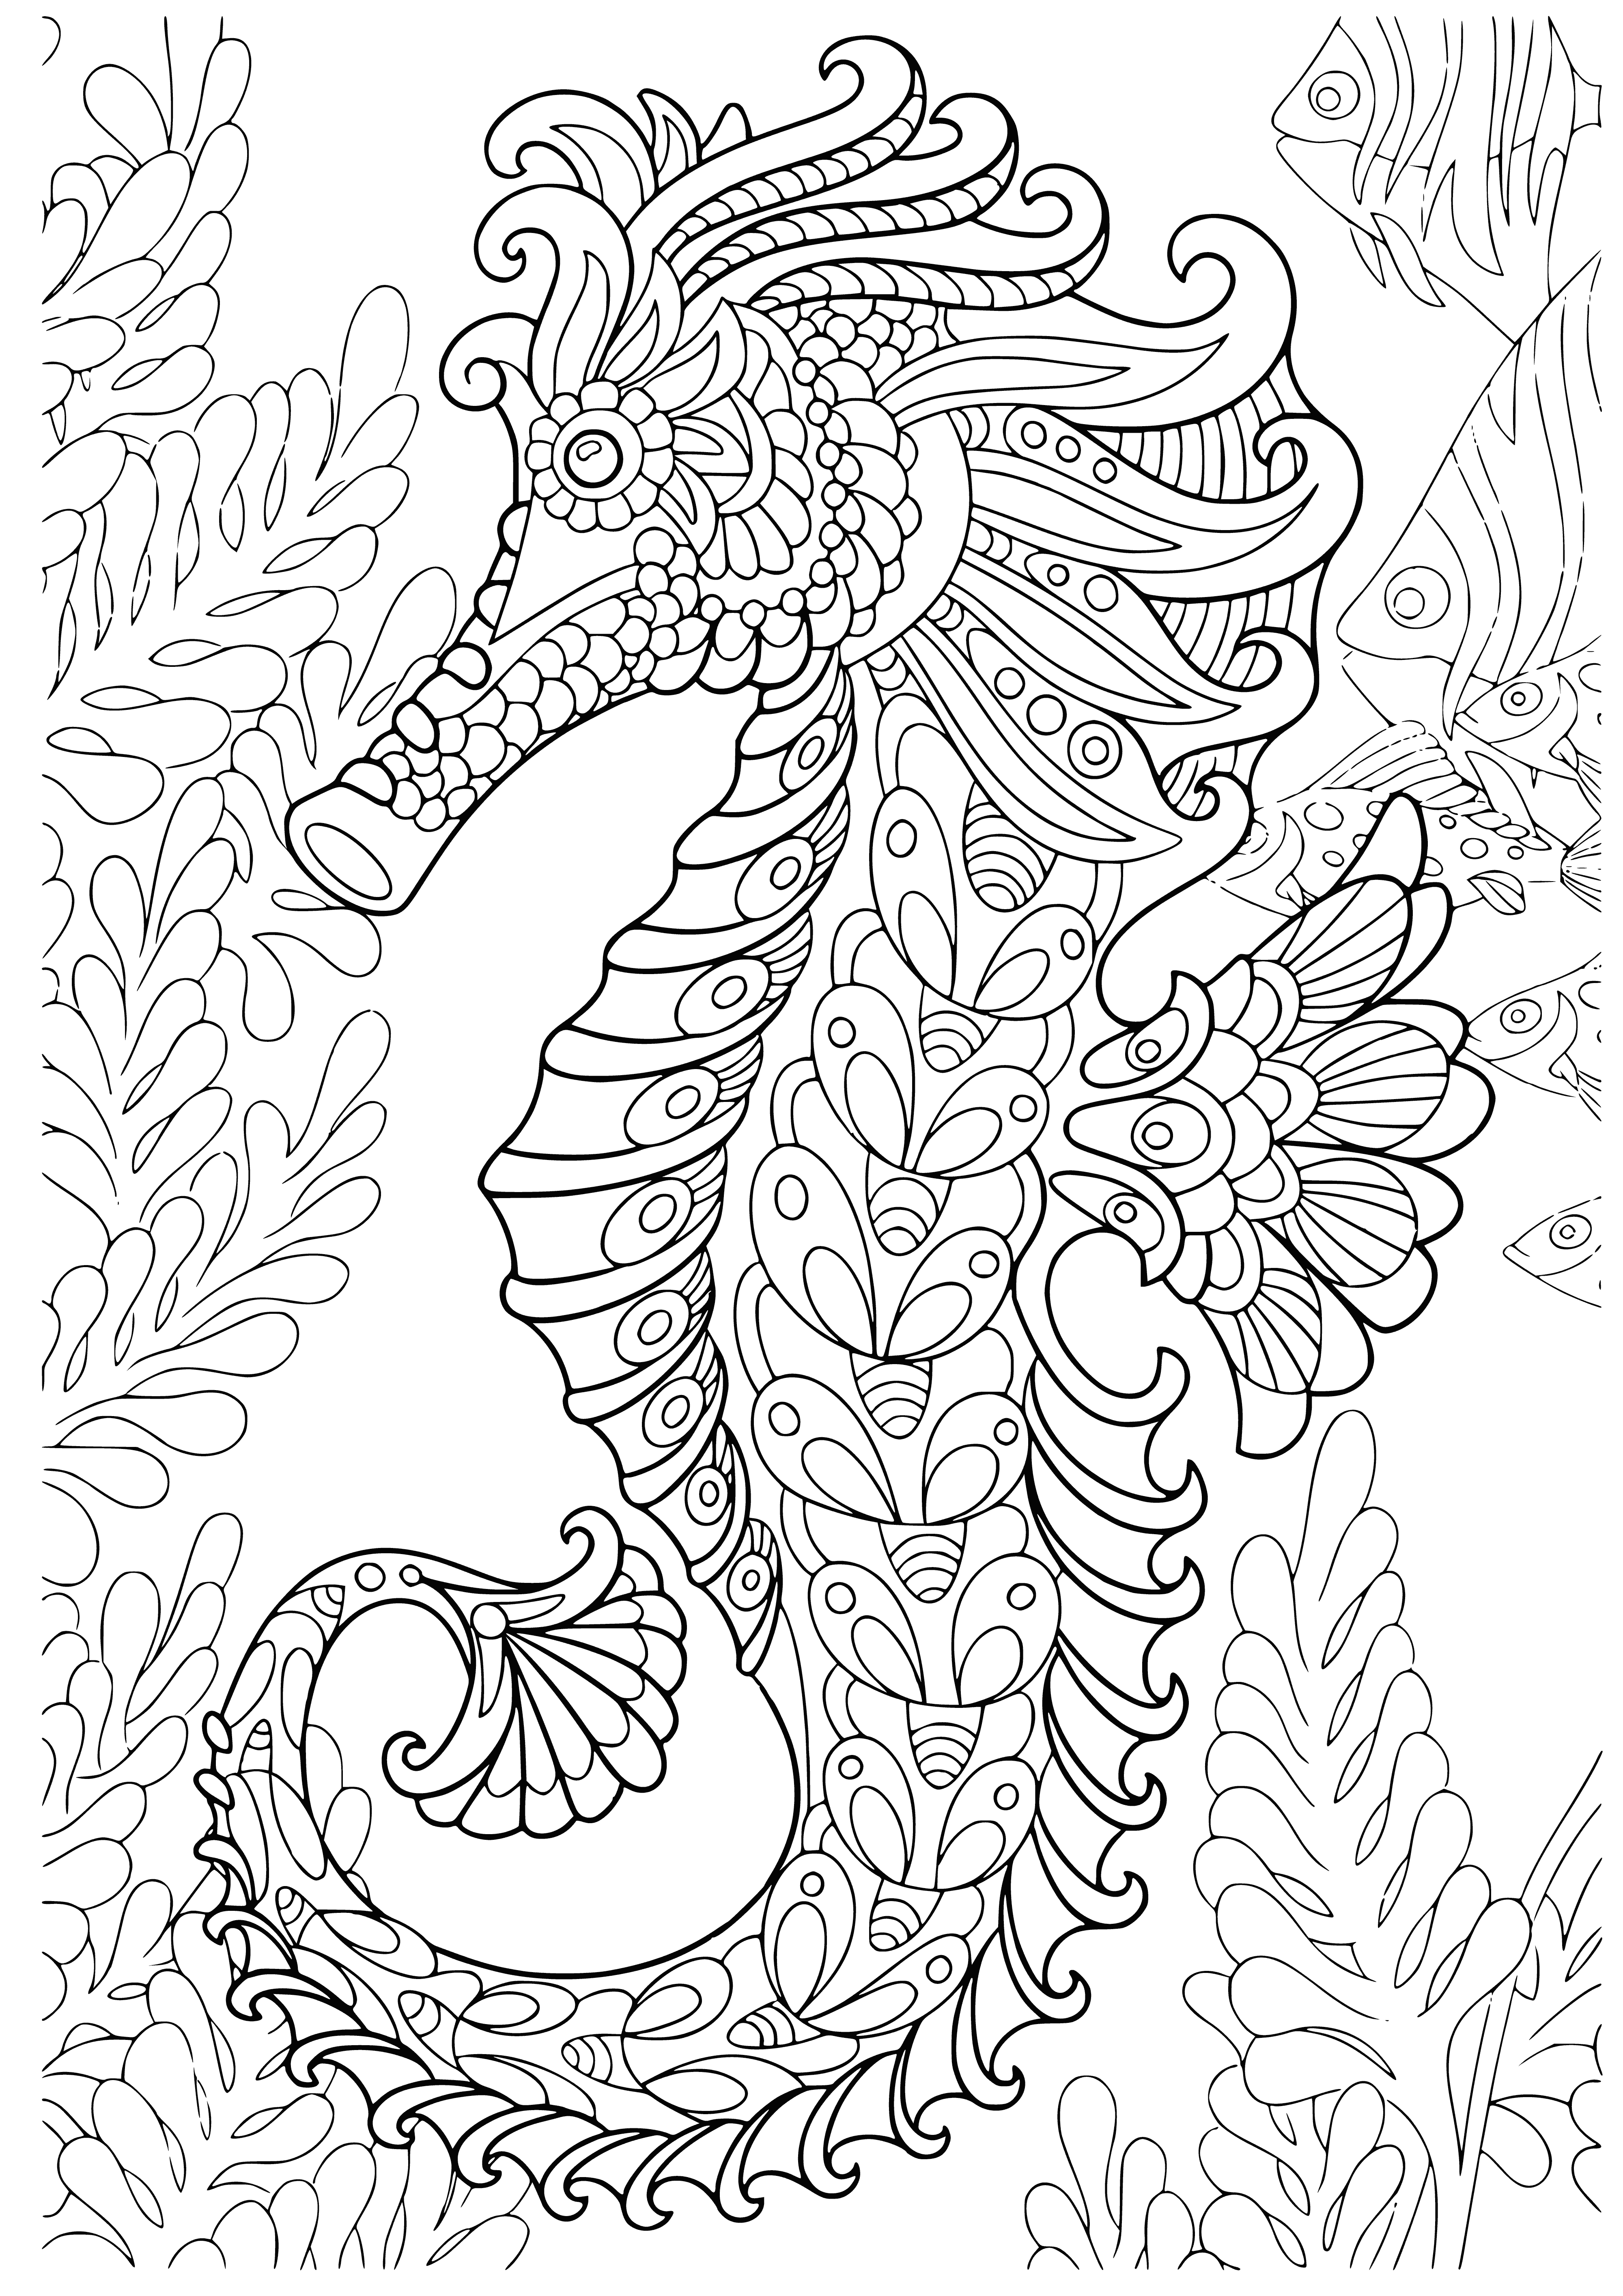 coloring page: A sea horse drifts near the ocean floor, a show of majestic blues, greens, and purples. Its tail wraps around a rock, and small fish dart nearby. A school of brightly-colored fish swims in the distance.